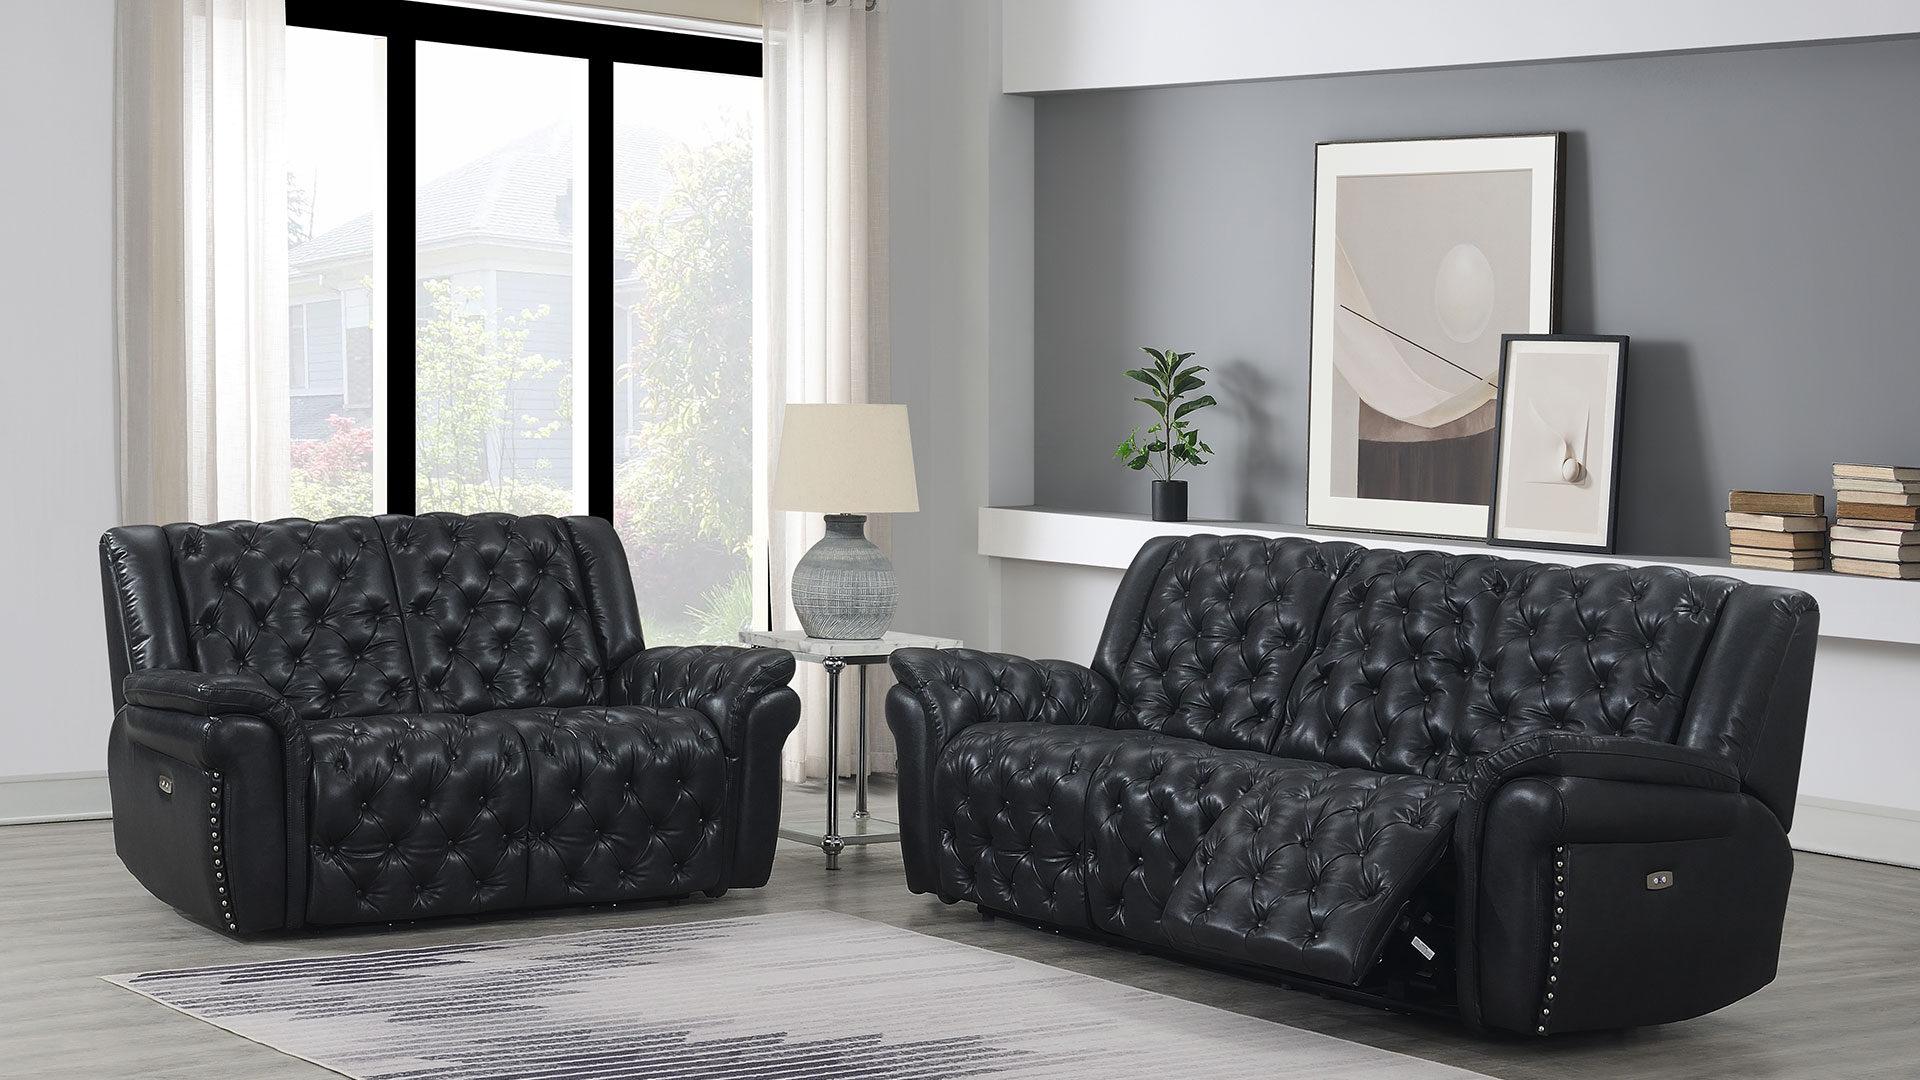 

    
Charcoal Gray Leather Air Power Reclining Sofa Set 2Pcs EVELYN Global USA
